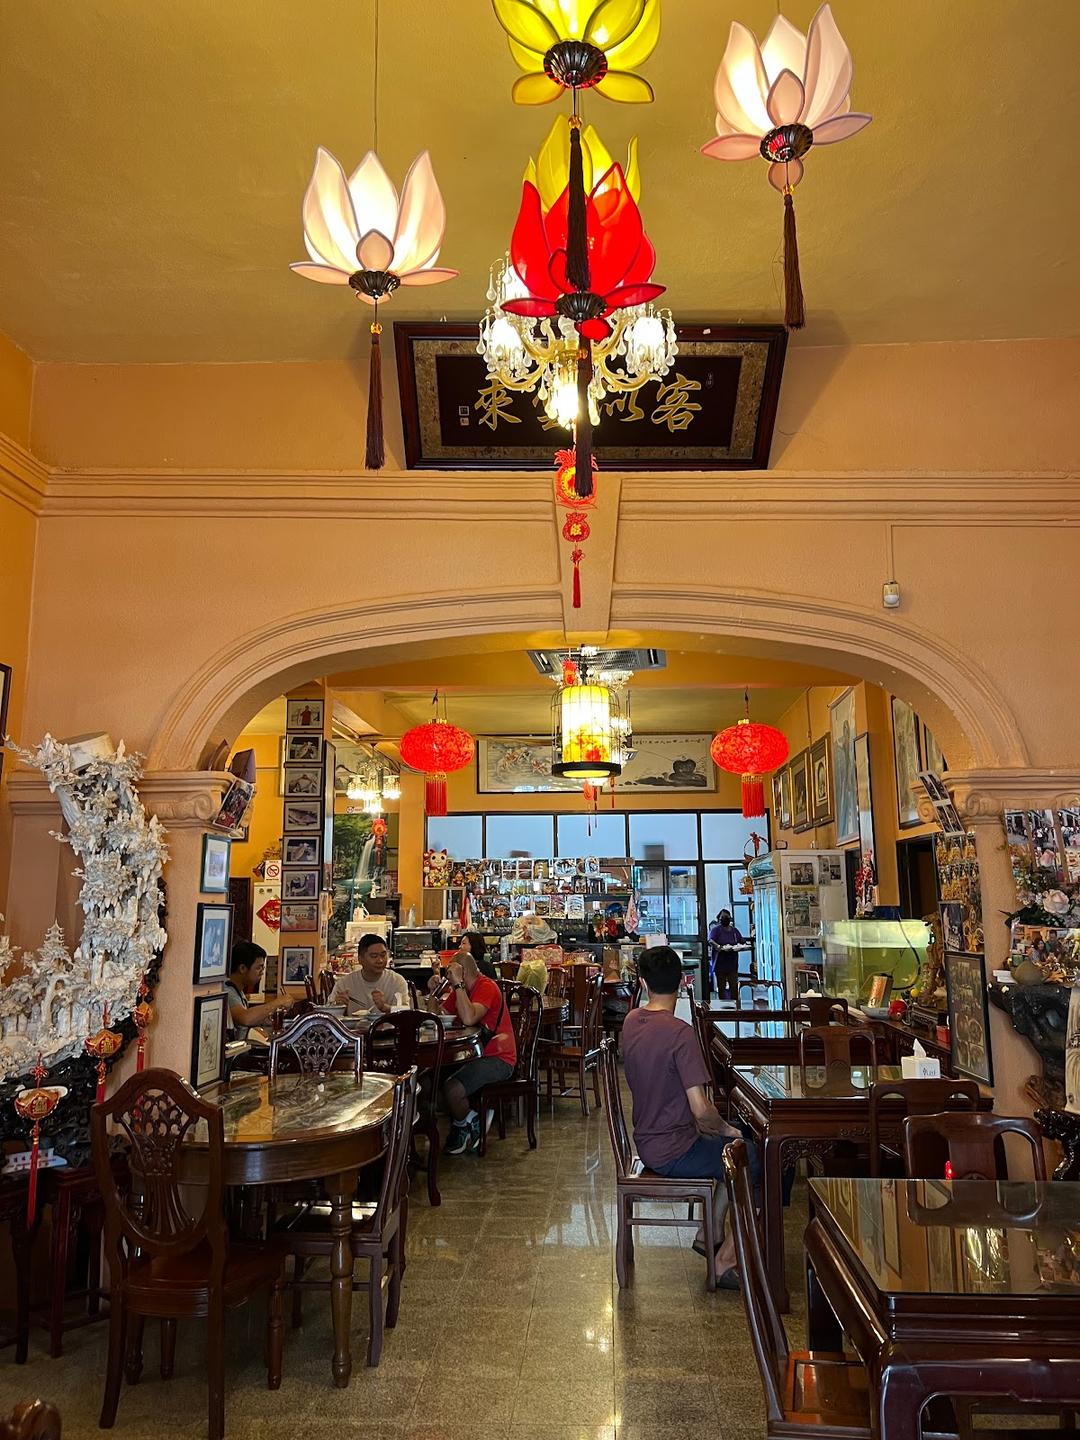 Photo of Restoran Old House - George Town, Penang, Malaysia